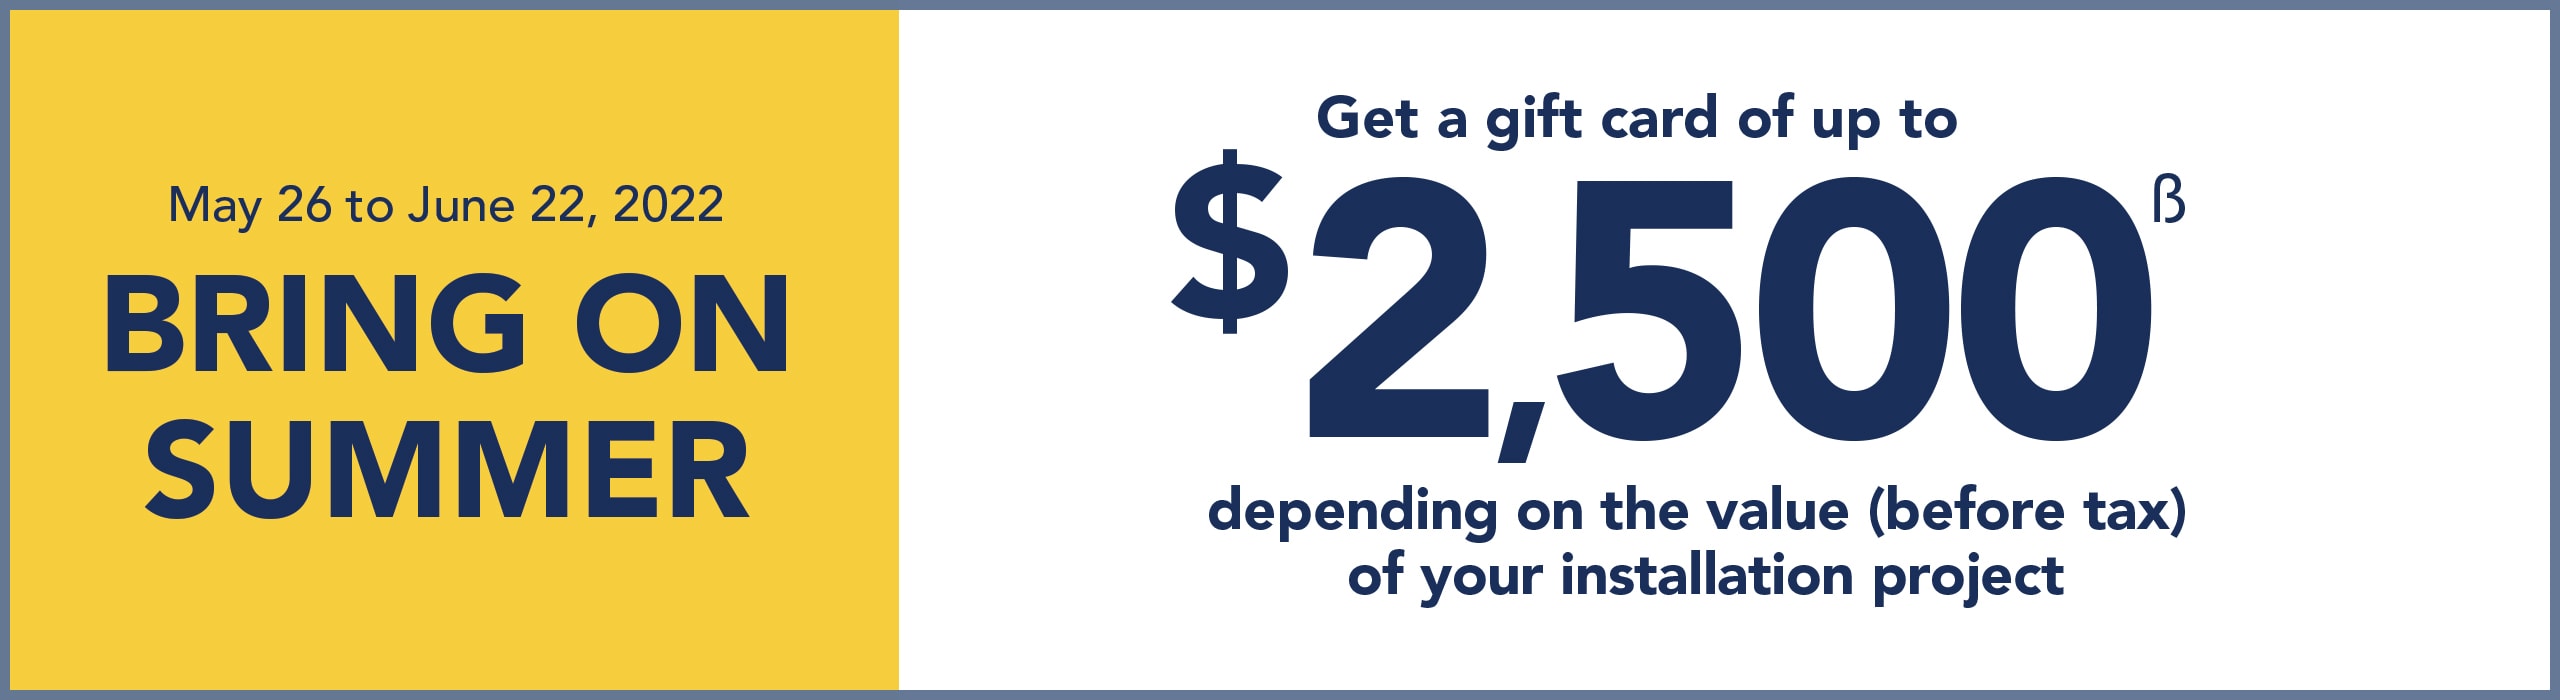 Until June 22, Get a gift card of up to $2,500 depending on the value (before tax) of your installation project
